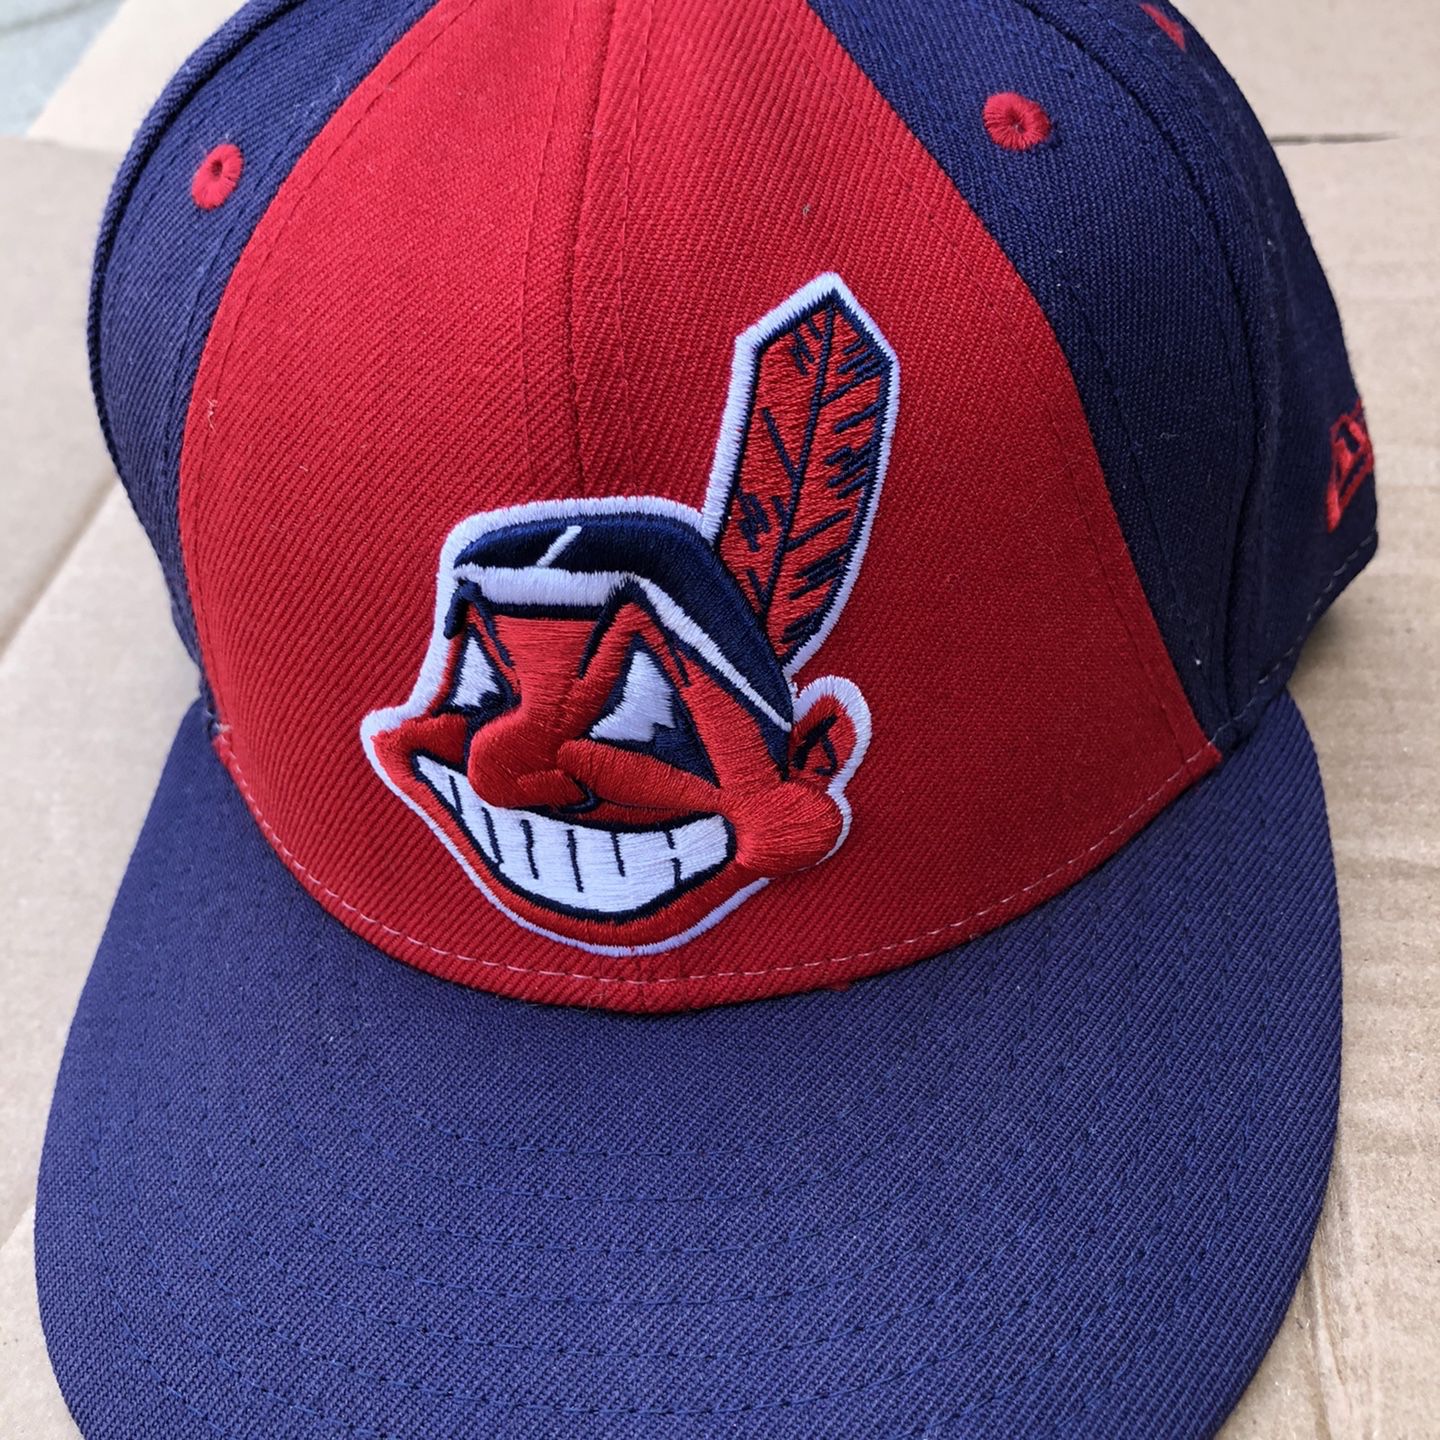 Cleveland Indians Chief Wahoo Shirt for Sale in Las Vegas, NV - OfferUp